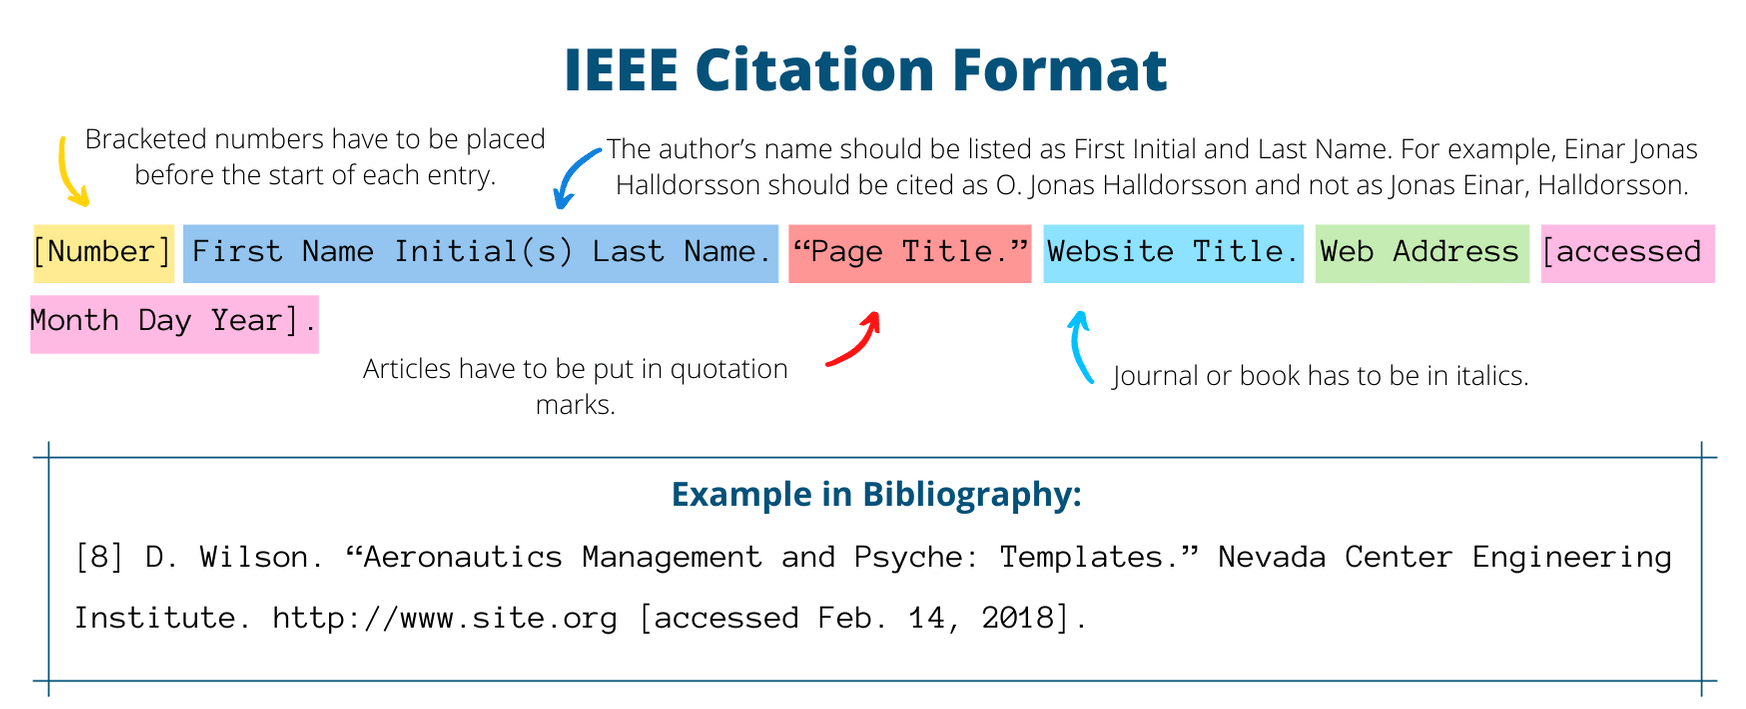 phd thesis citation ieee